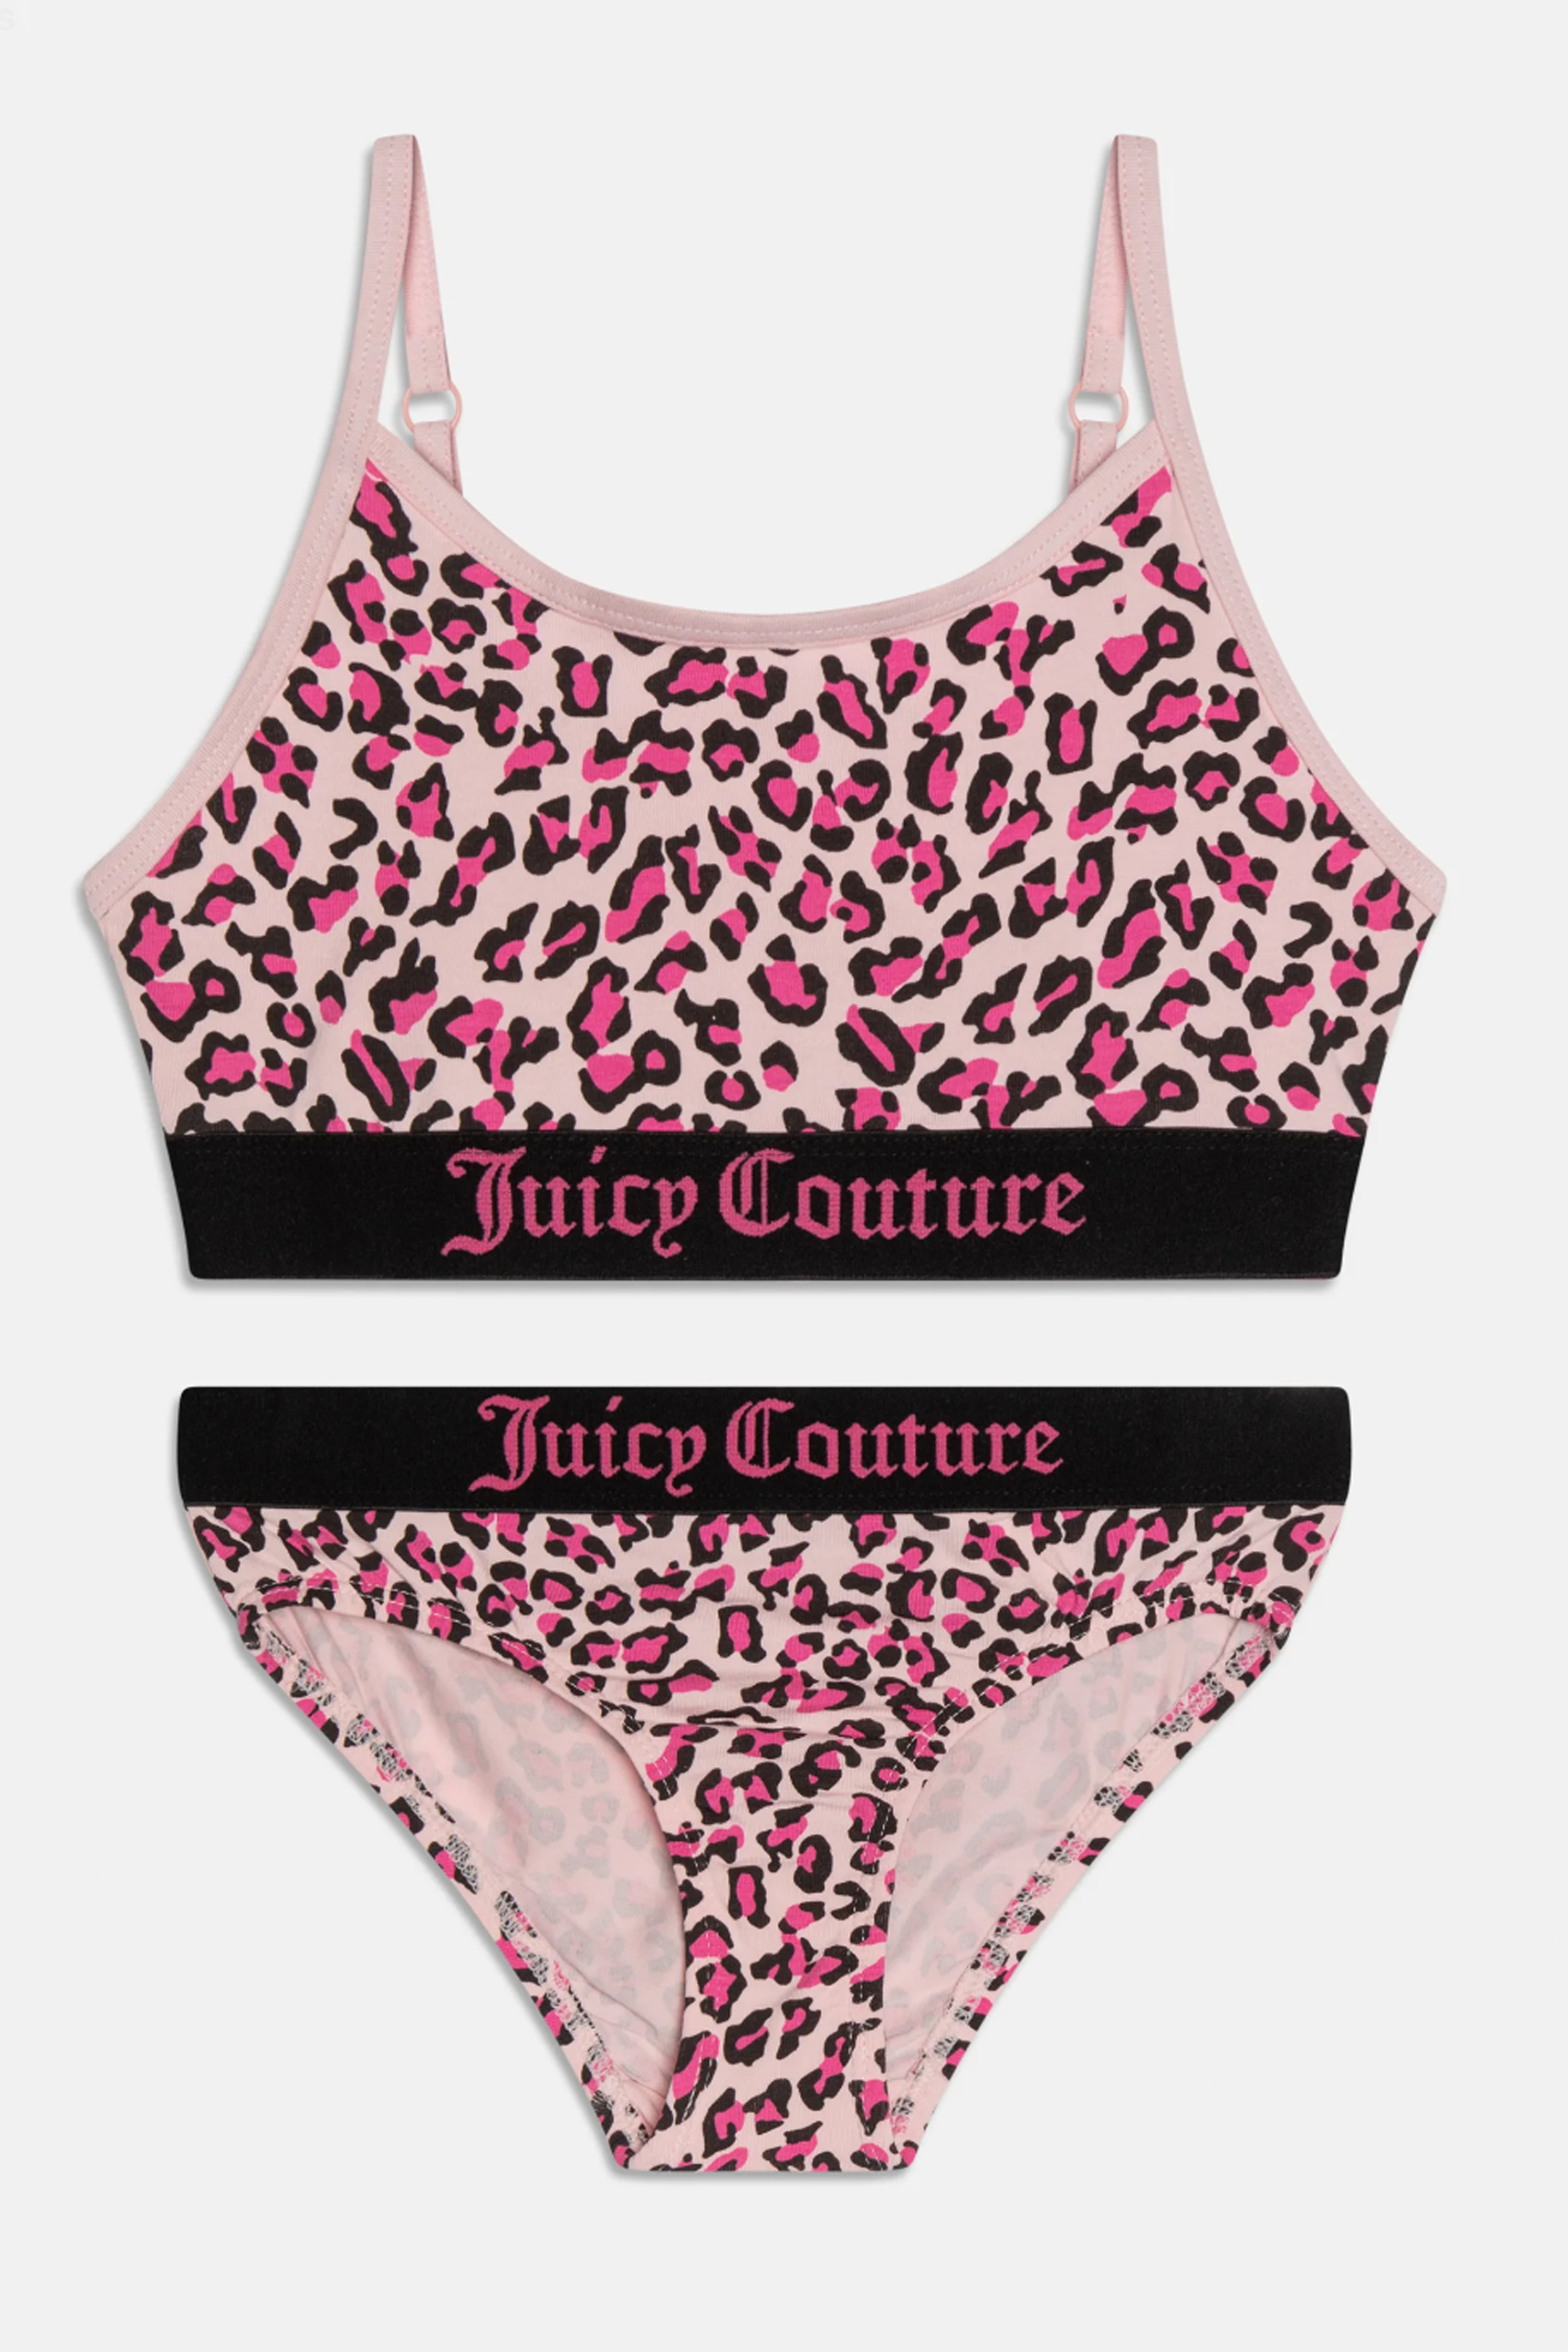 Juicy Couture Leaf Panties for Women